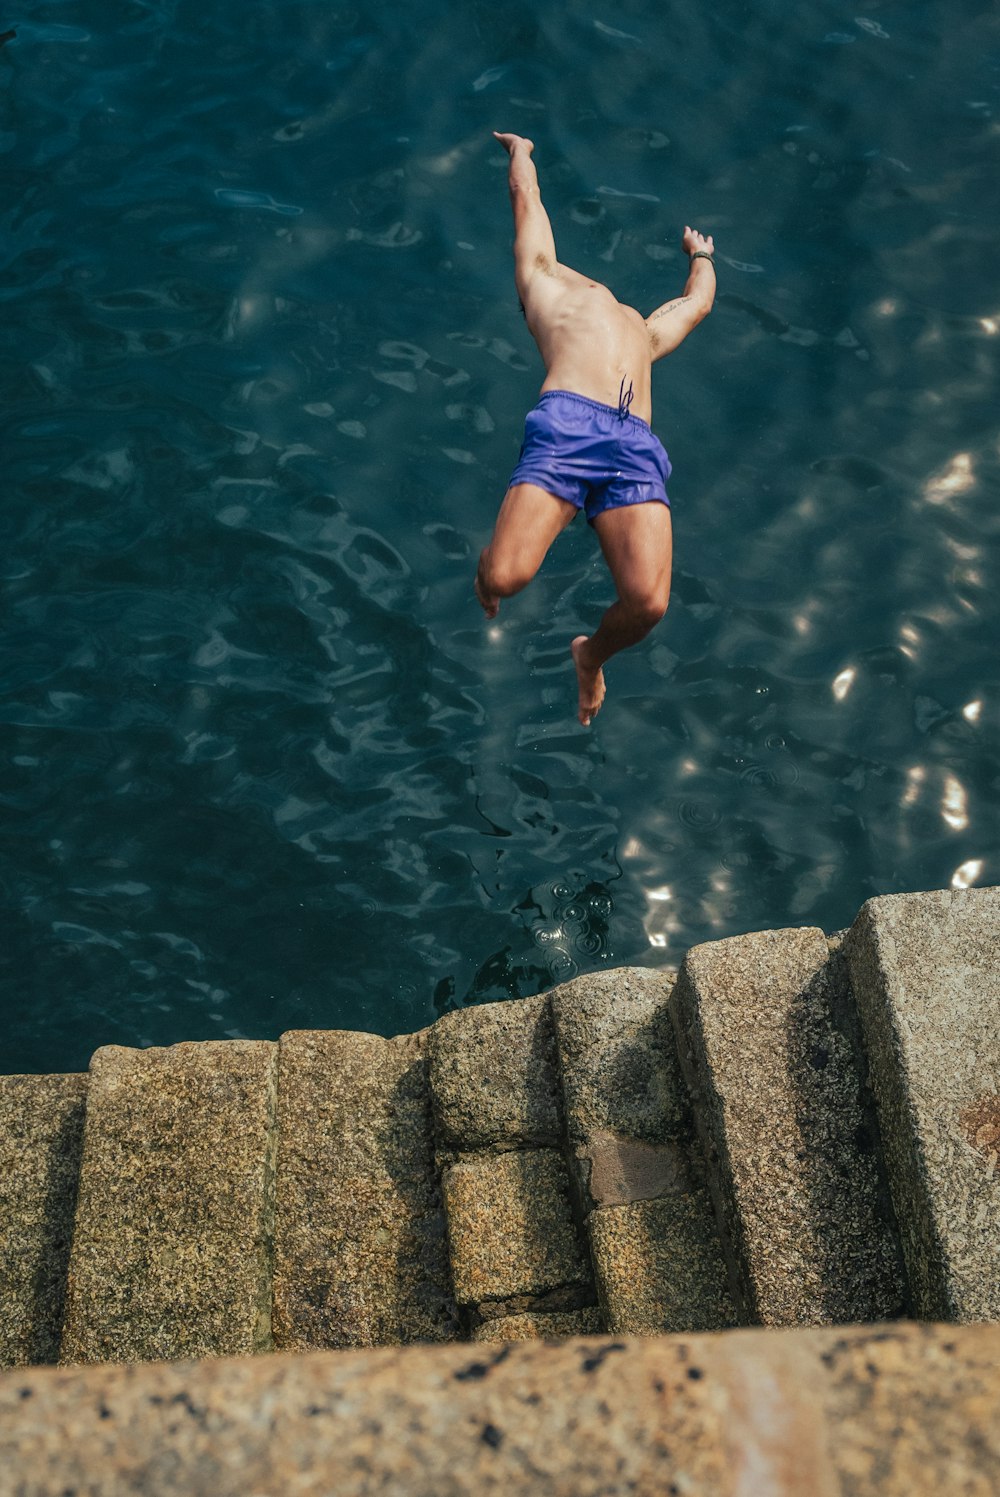 a man jumping off a ledge into a body of water